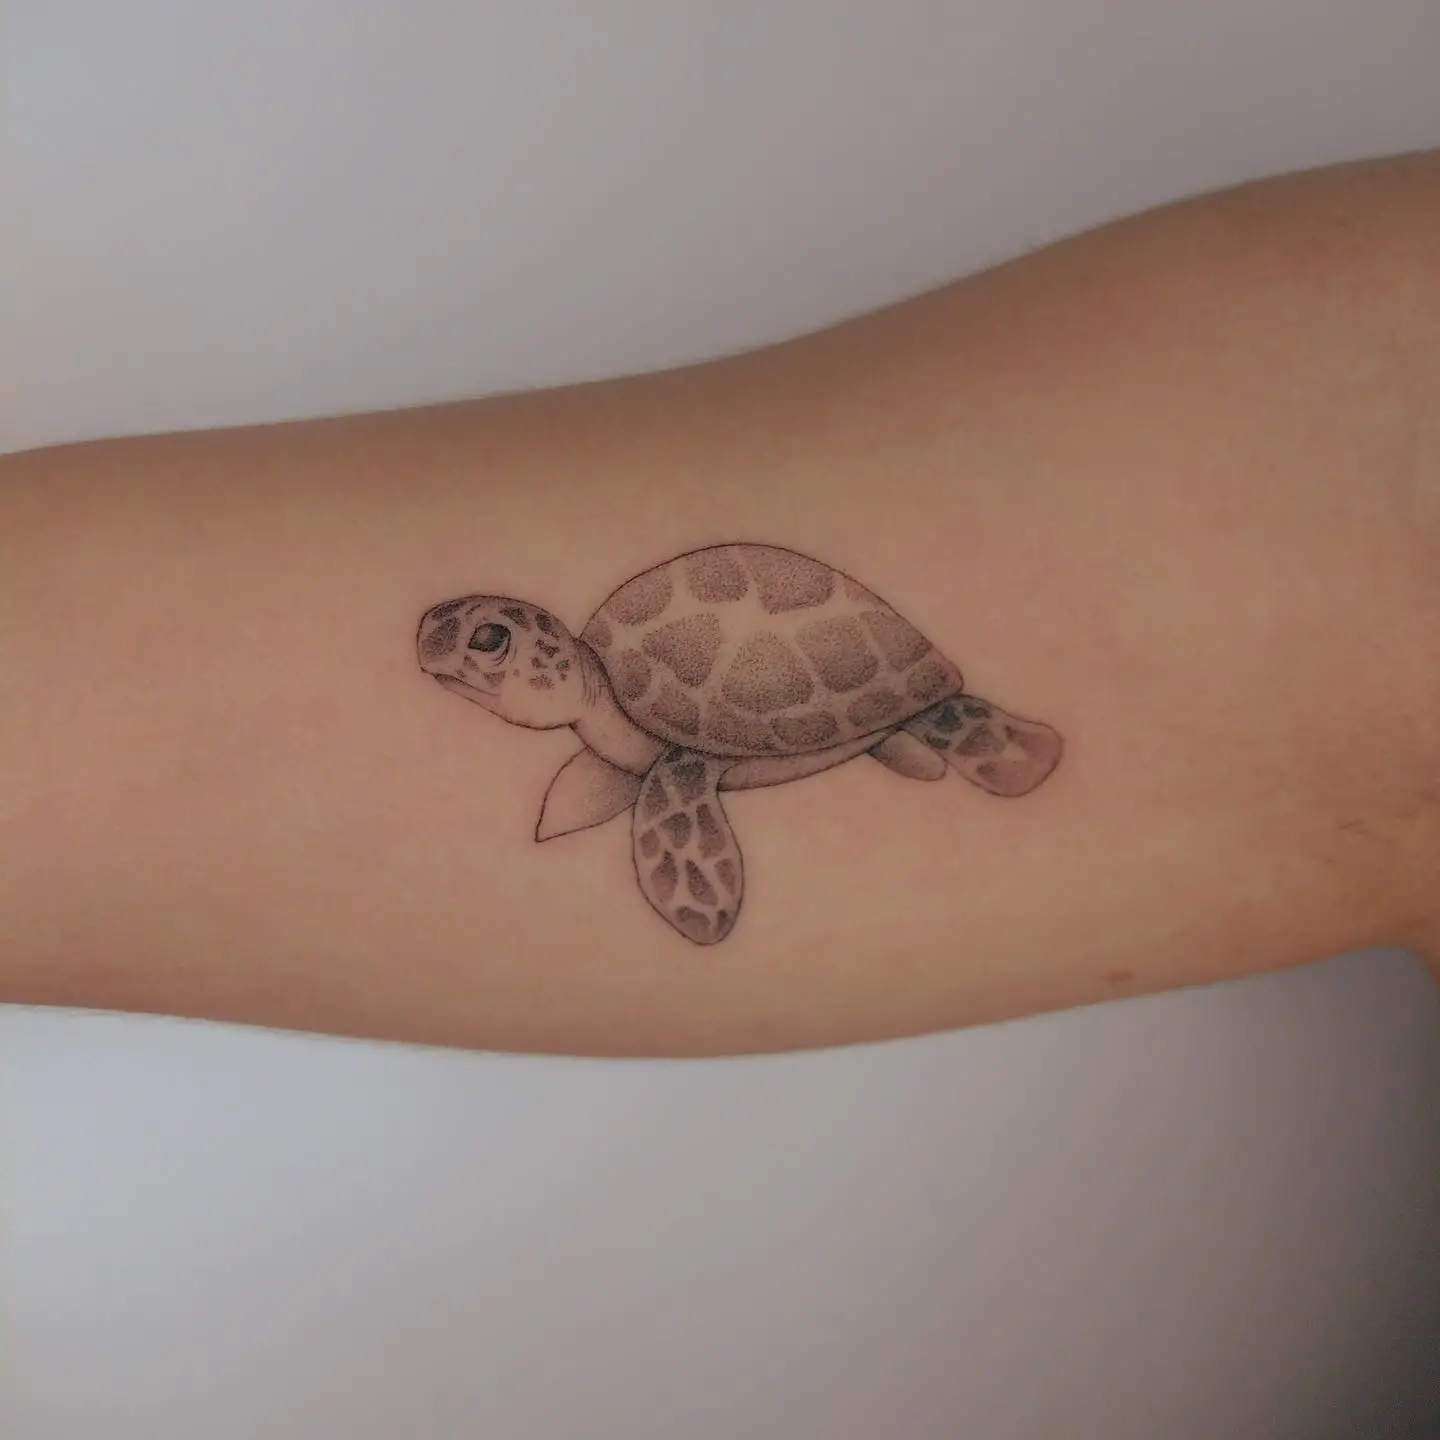 Turtle tattoo on forearm by delcocotattoo